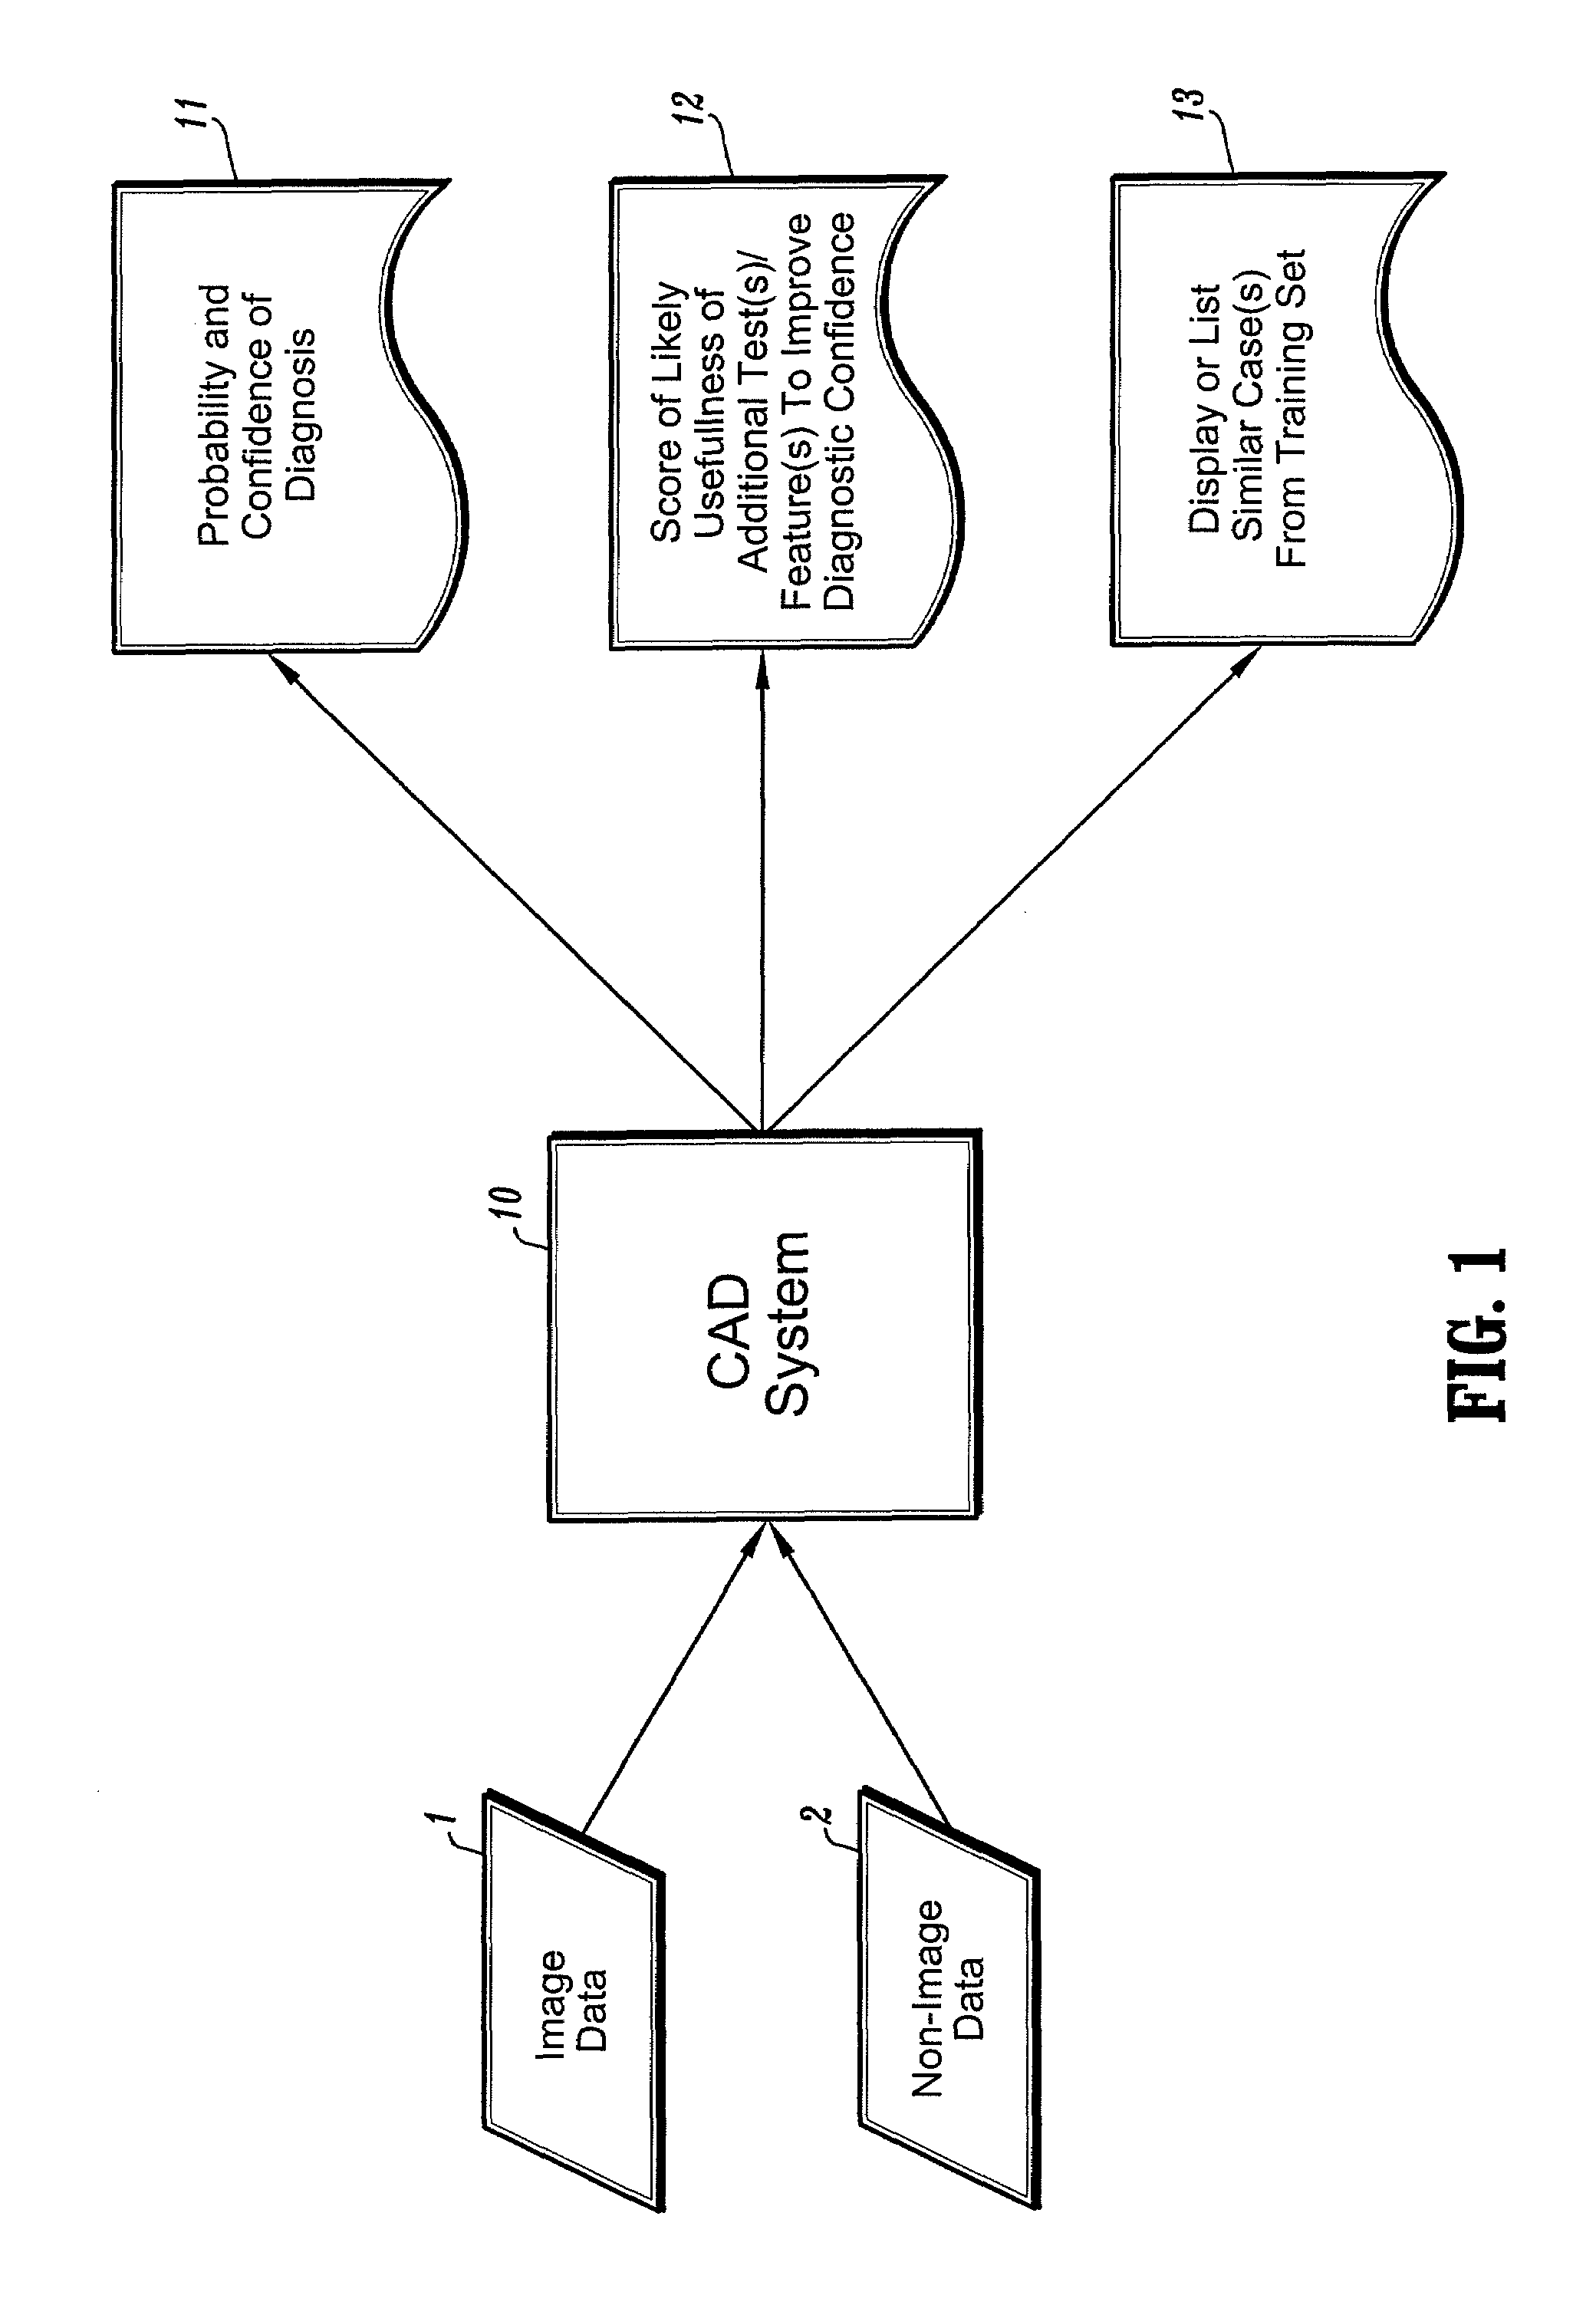 Systems and methods for automated diagnosis and decision support for breast imaging